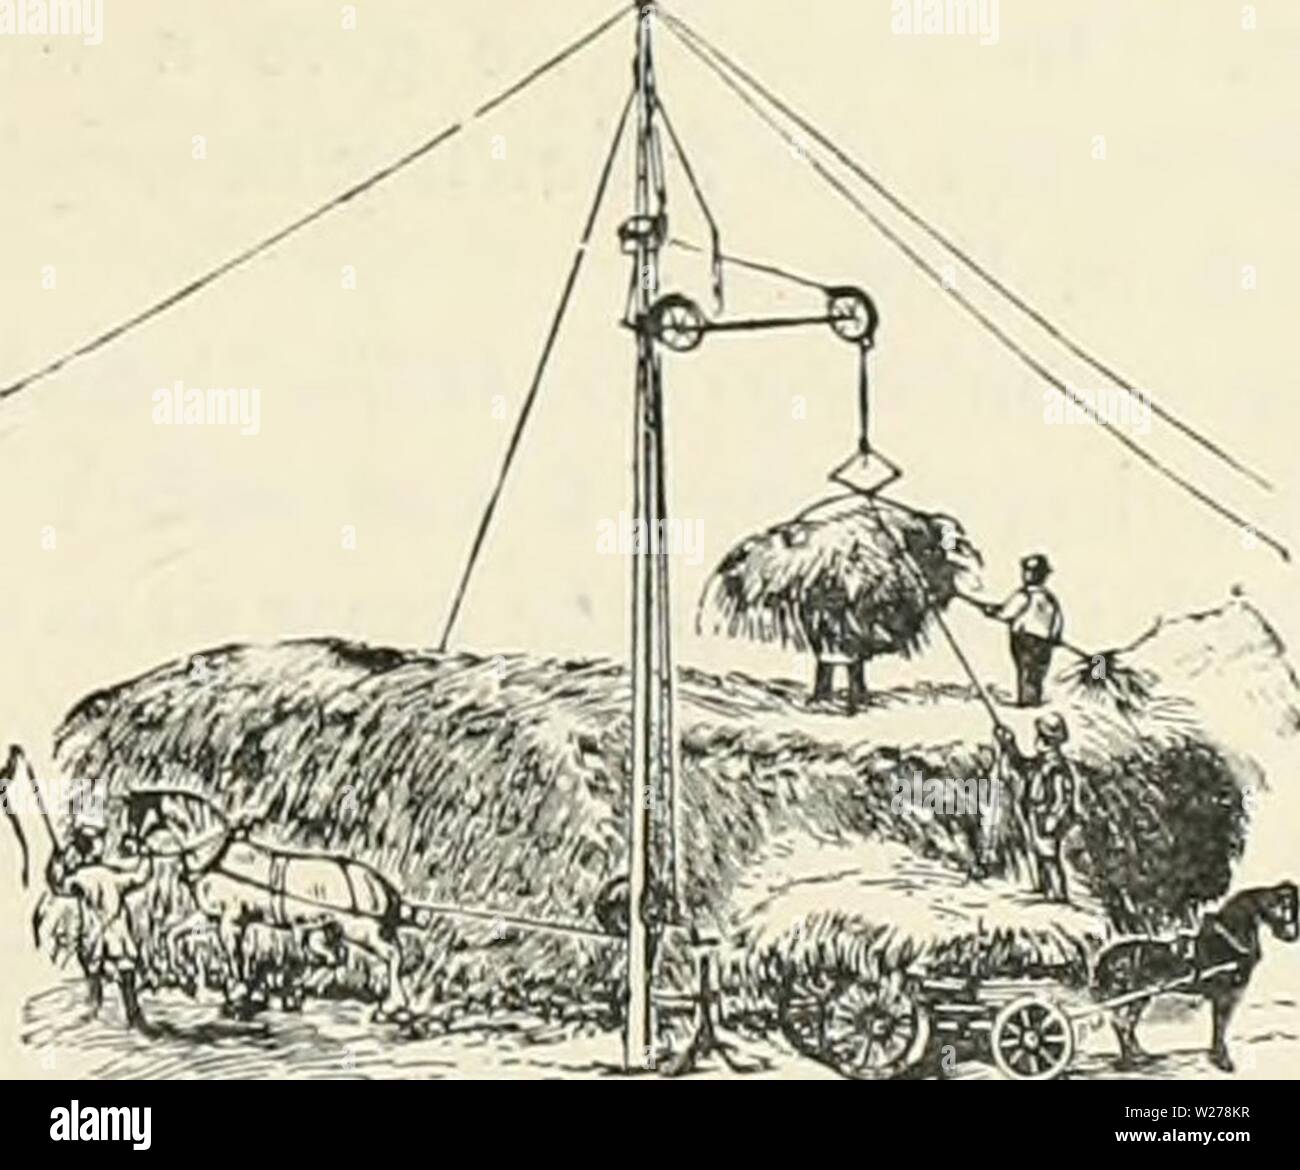 Archive image from page 252 of Dairy farming  being the. Dairy farming : being the theory, practice, and methods of dairying  dairyfarmingbein00shel Year: 1880  1 Rk ON l-RVMEWORk suspended from the ridge-tree. In this case the four small wheels which carry the fork run on the one spar instead of two, clasping it, so to speak, turned inwards instead of outwards on the frame to which they and the fork are attached, and leaving a space between each pair, so as to clear the iron bolts by which the spar is suspended. This principle will answer instead of the fore- going one inside a barn, while it Stock Photo